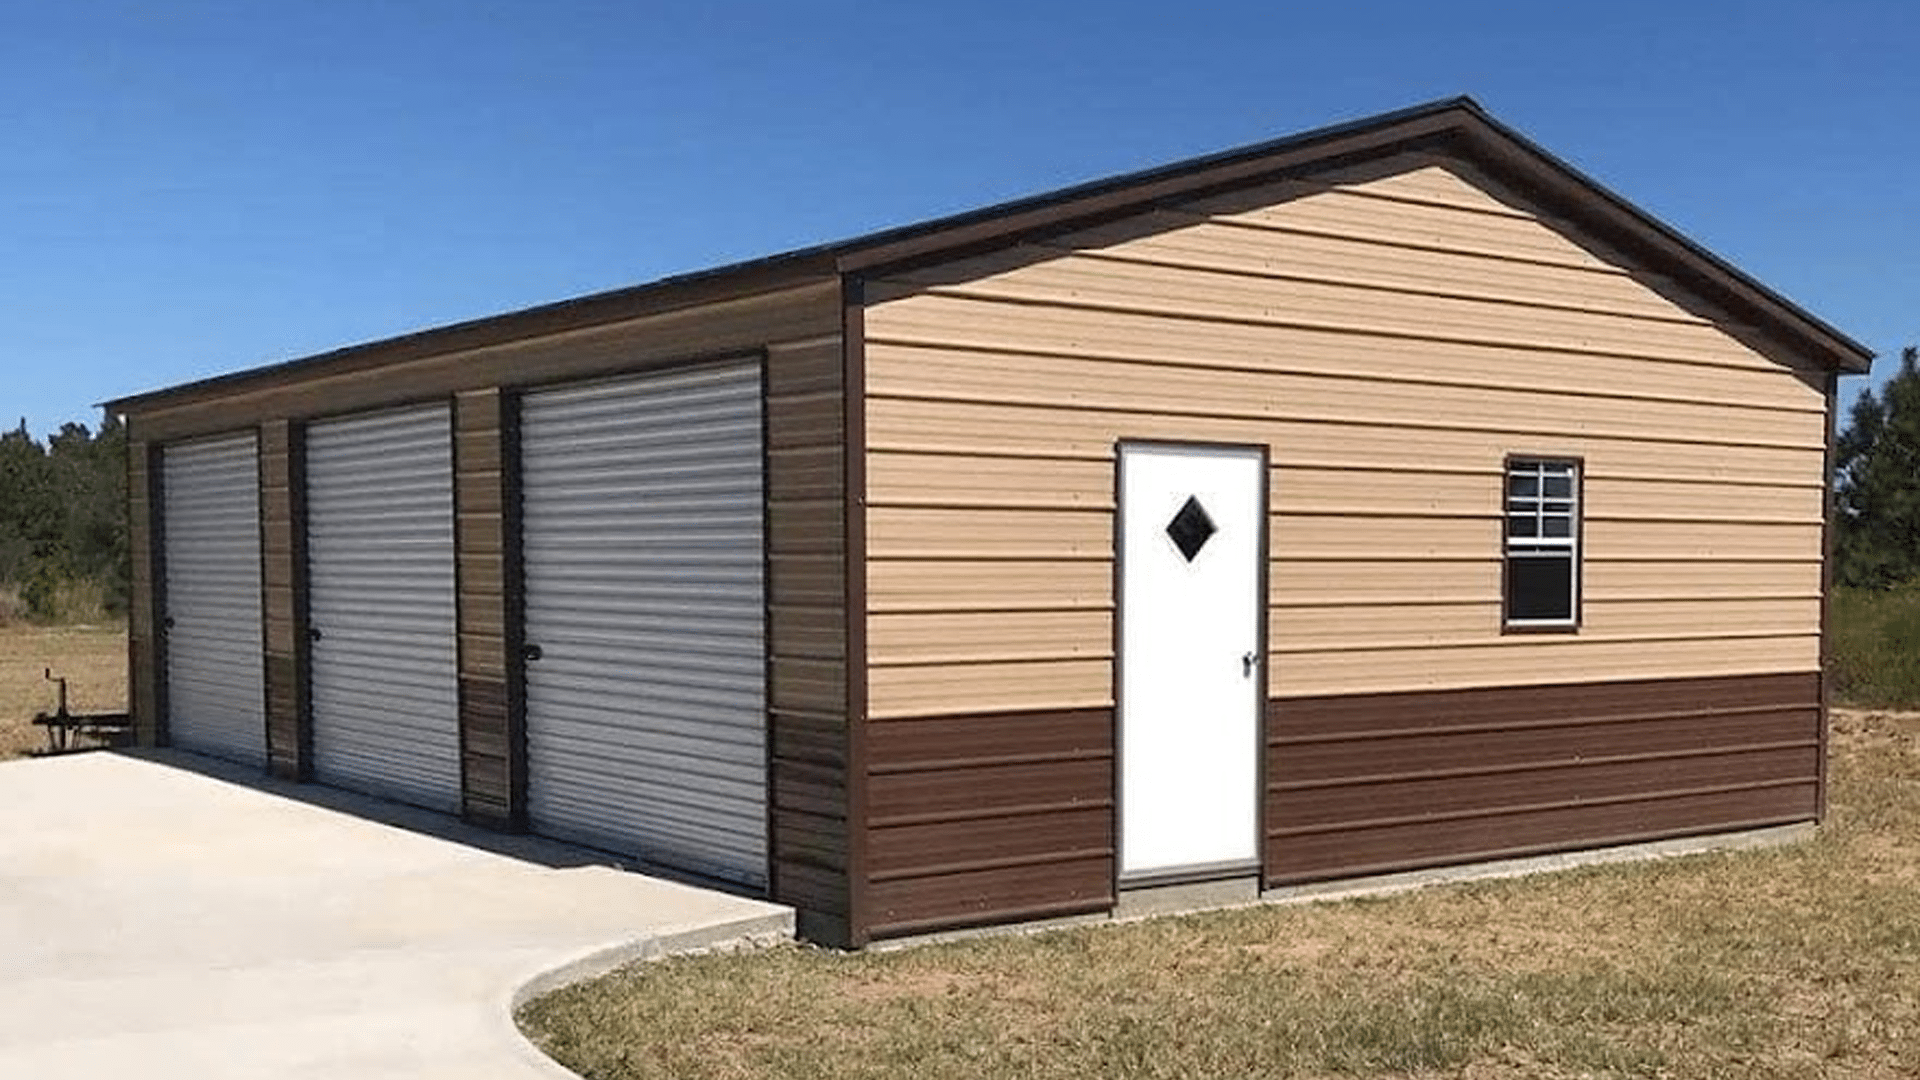 A brown metal building from Outdoor Options in Eatonton Georgia